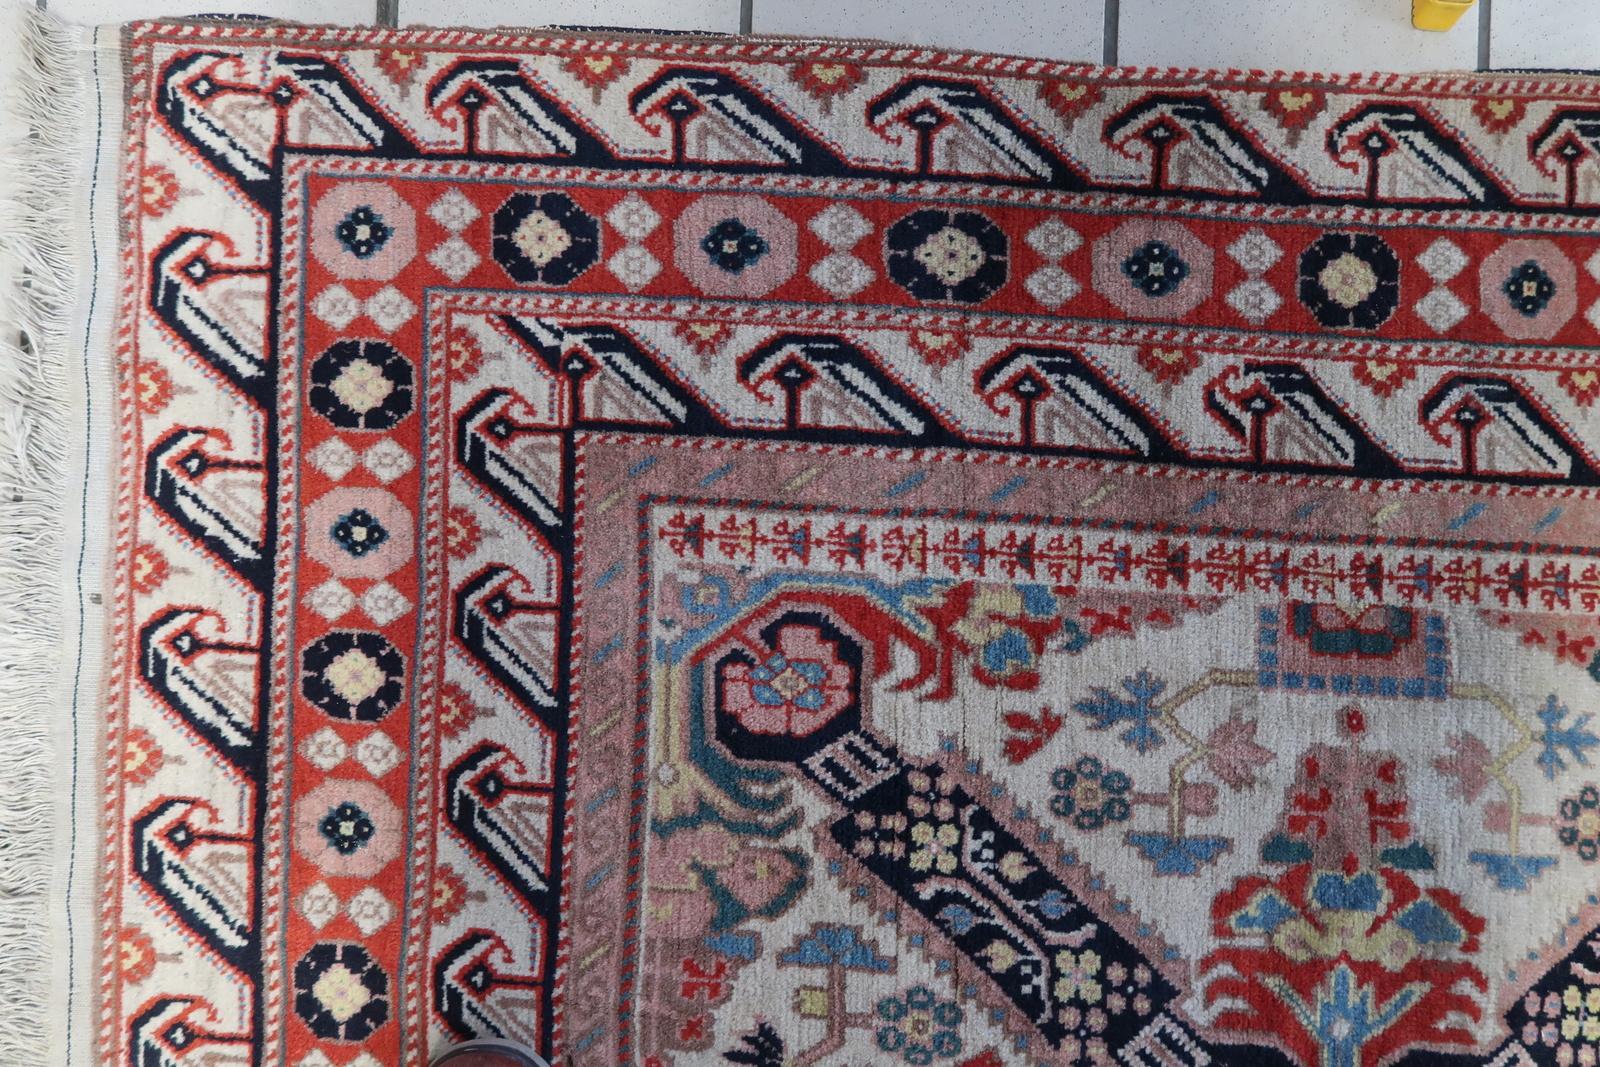 Introducing our exquisite Handmade Vintage Caucasian Zeyhur Rug from the 1950s. This captivating rug showcases a vibrant and busy design with a white background and striking pops of color. With its original good condition, this rug brings a touch of